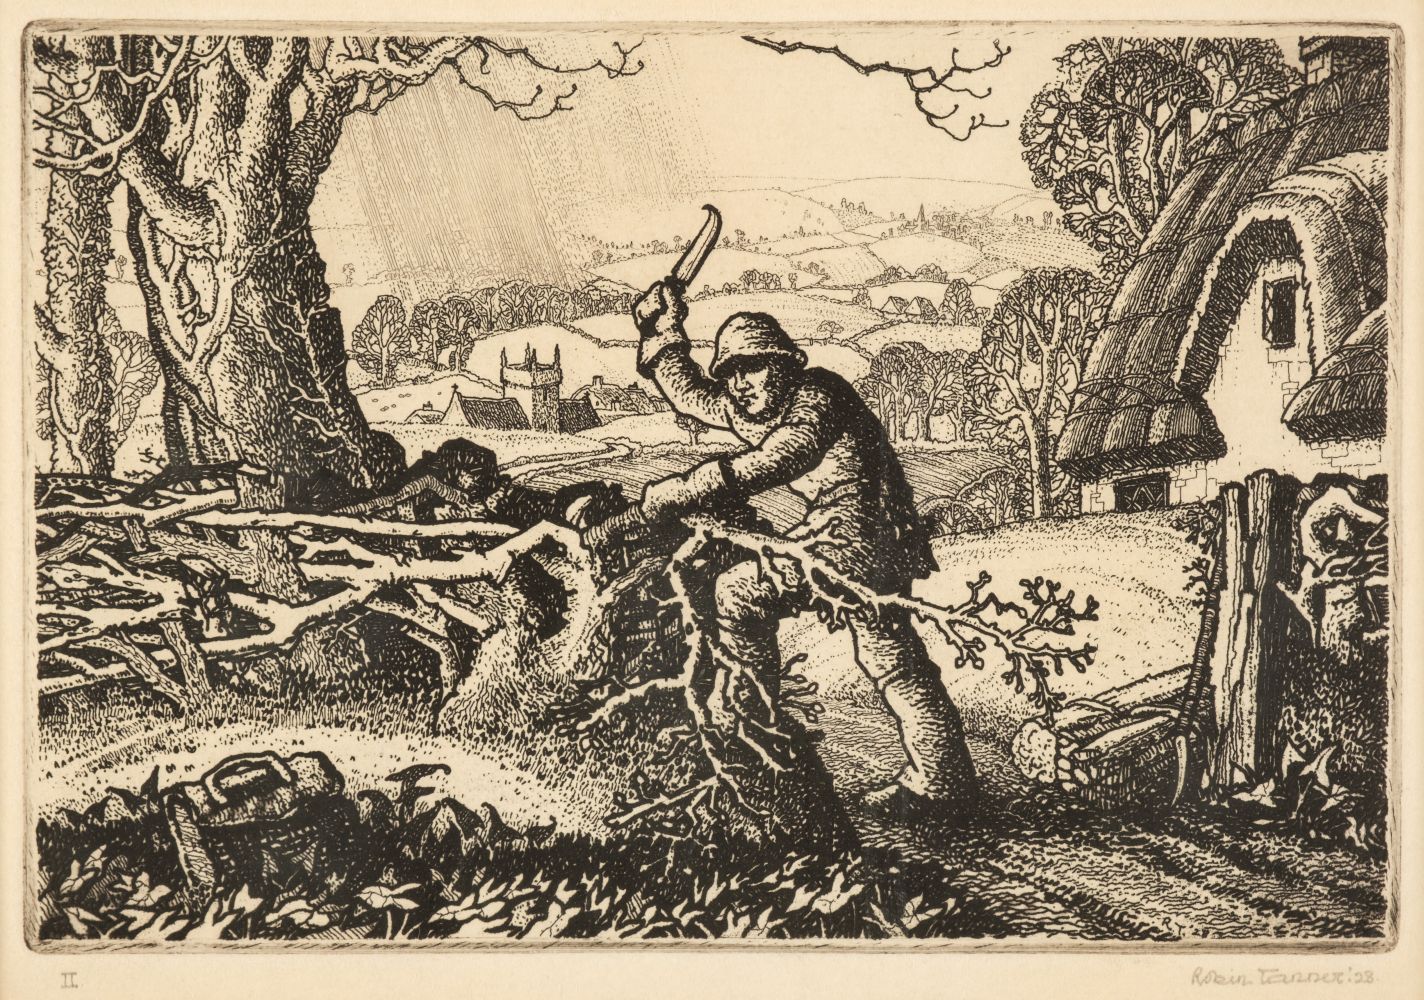 Tanner (Robin, 1904-1988). Wiltshire Hedger, 1928, etching, the rare first state